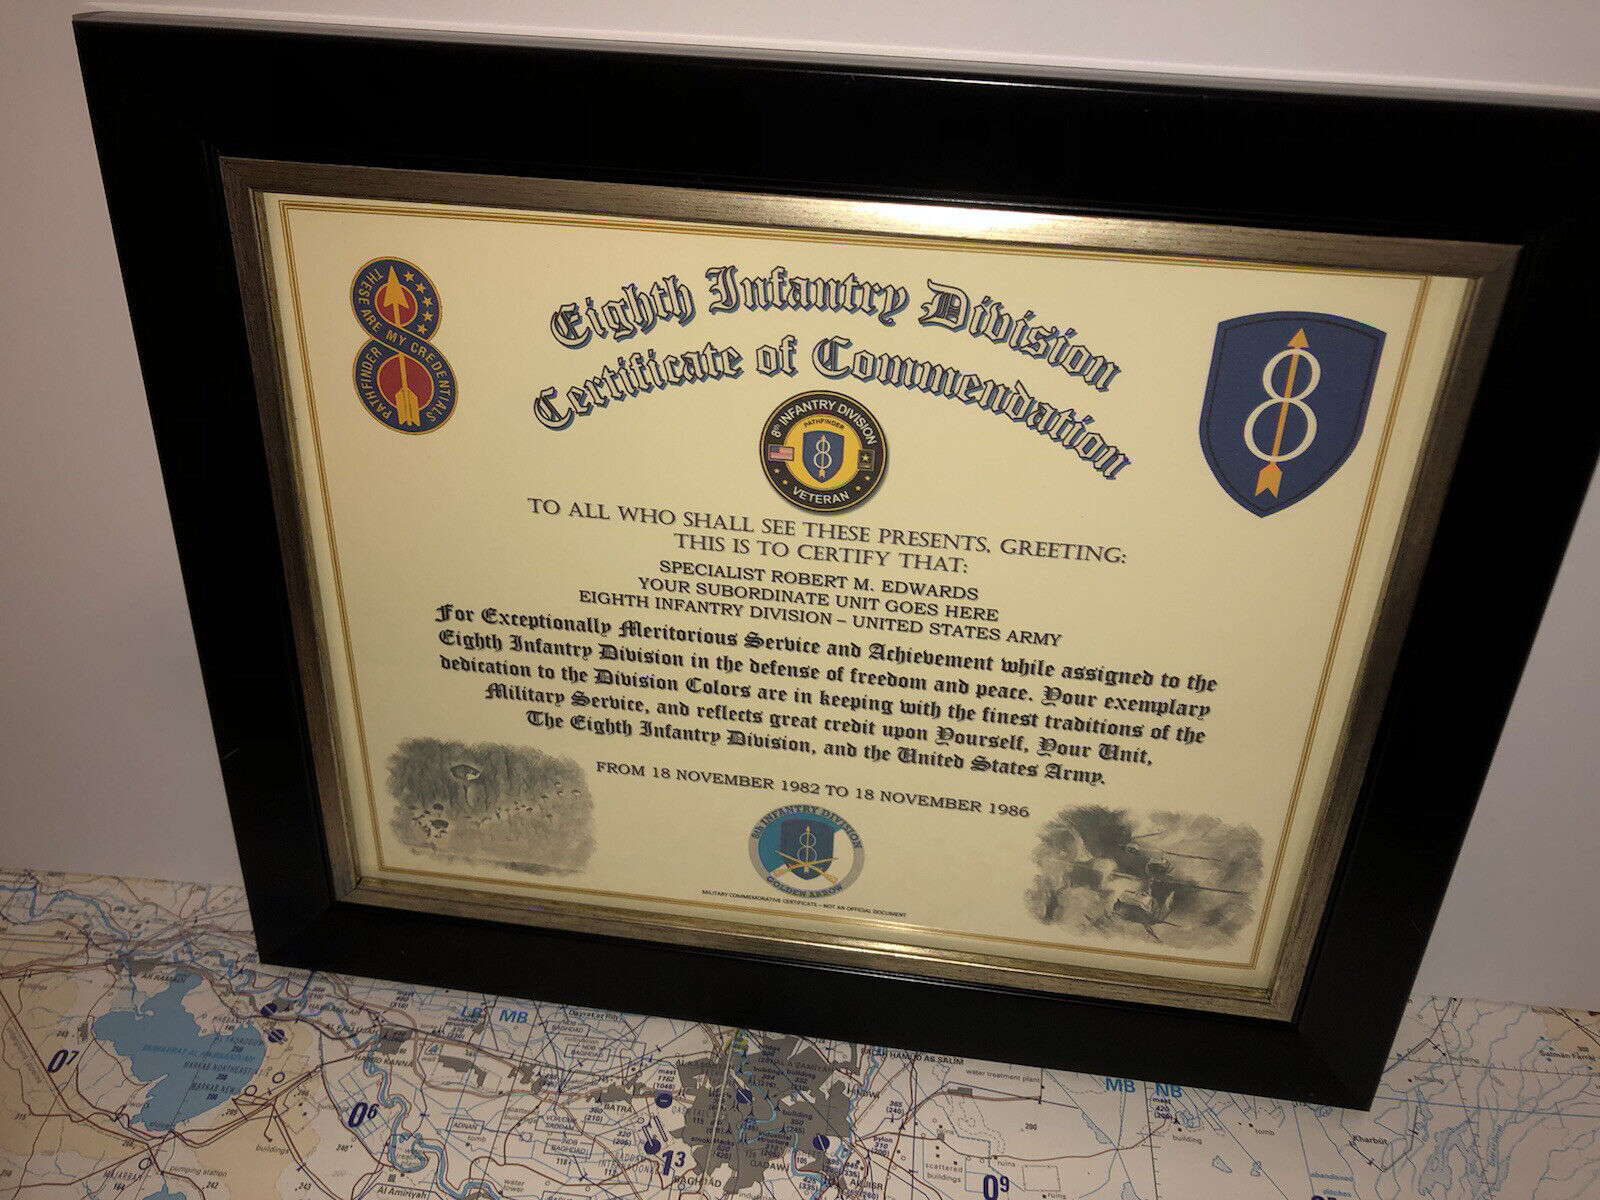 8TH INFANTRY DIVISION / COMMEMORATIVE - CERTIFICATE OF COMMENDATION